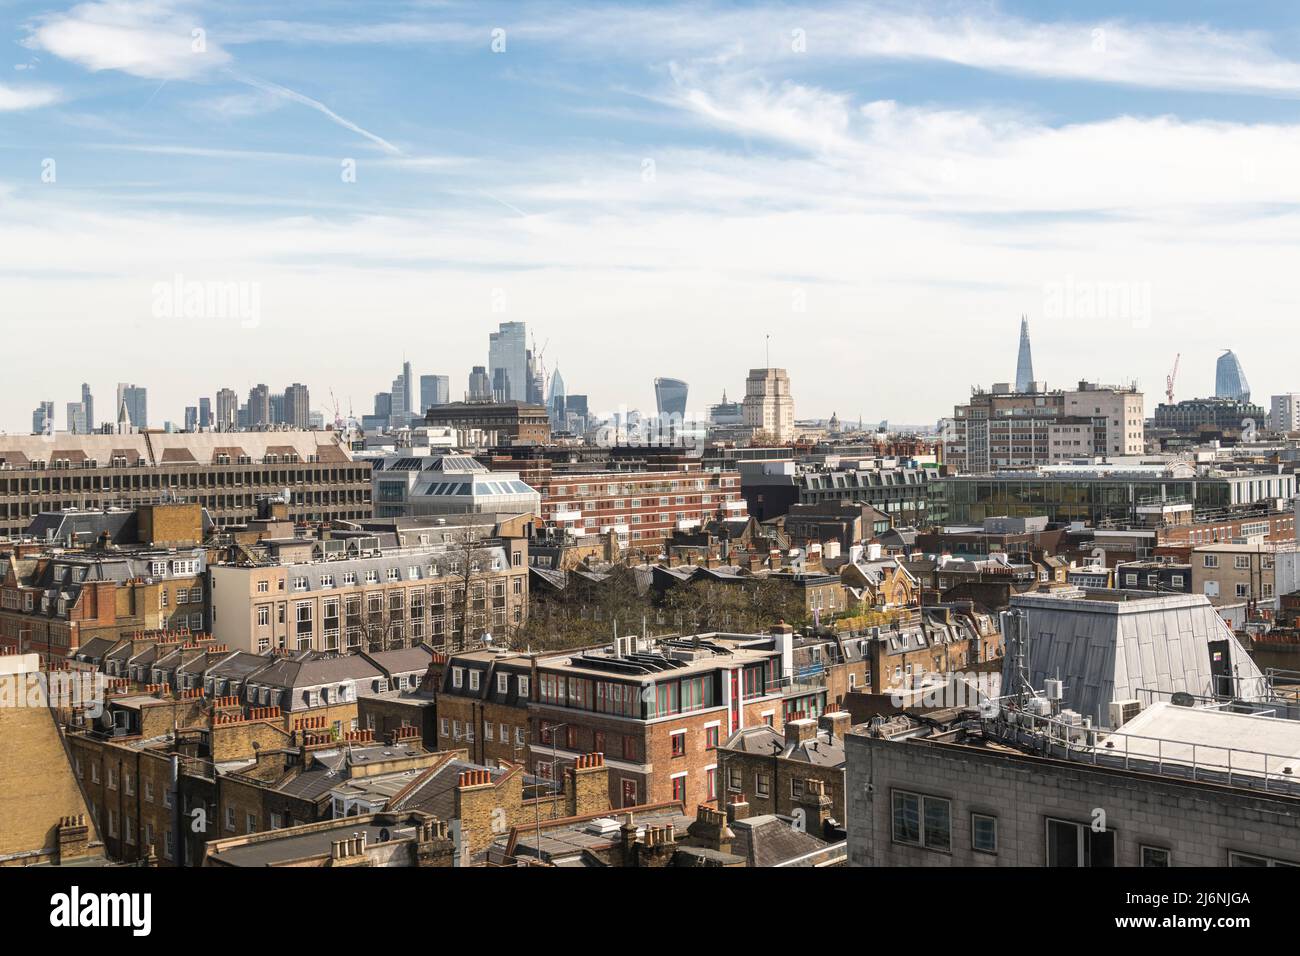 An aerial view over Fitzrovia and London's Skyline. Stock Photo